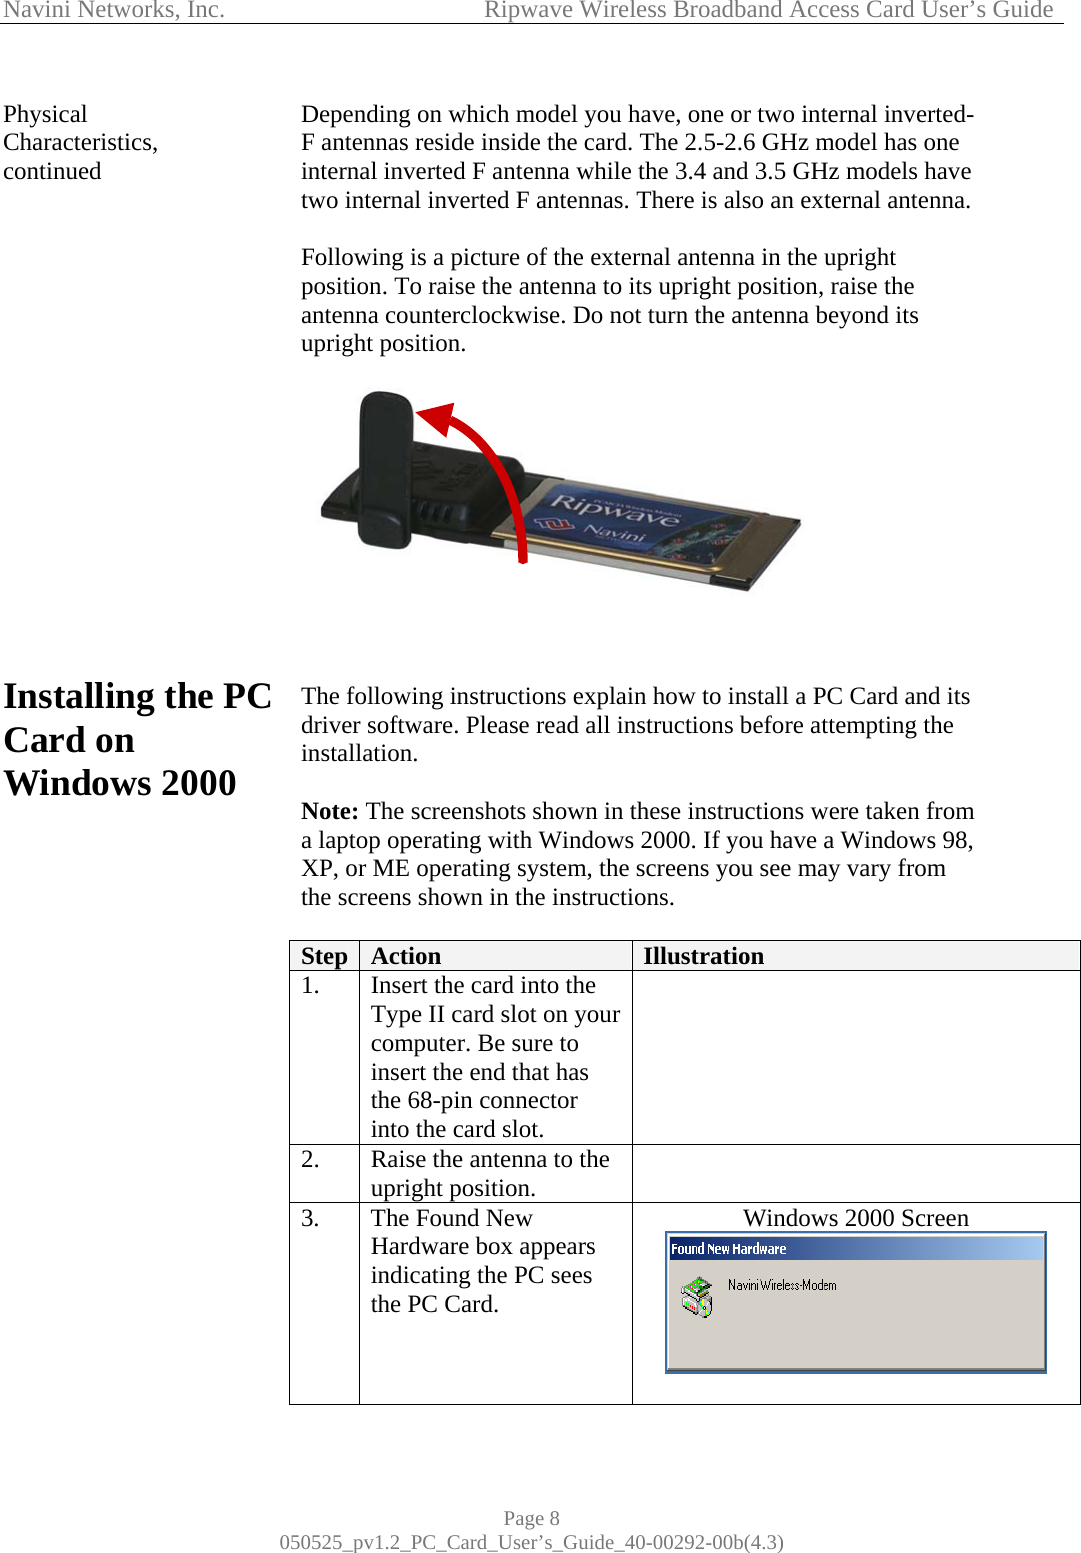 Navini Networks, Inc.            Ripwave Wireless Broadband Access Card User’s Guide Page 8 050525_pv1.2_PC_Card_User’s_Guide_40-00292-00b(4.3) Physical Characteristics, continued                  Installing the PC Card on Windows 2000                      Depending on which model you have, one or two internal inverted-F antennas reside inside the card. The 2.5-2.6 GHz model has one internal inverted F antenna while the 3.4 and 3.5 GHz models have two internal inverted F antennas. There is also an external antenna.   Following is a picture of the external antenna in the upright position. To raise the antenna to its upright position, raise the antenna counterclockwise. Do not turn the antenna beyond its upright position.     The following instructions explain how to install a PC Card and its driver software. Please read all instructions before attempting the installation.   Note: The screenshots shown in these instructions were taken from a laptop operating with Windows 2000. If you have a Windows 98, XP, or ME operating system, the screens you see may vary from the screens shown in the instructions.  Step  Action  Illustration  1.  Insert the card into the Type II card slot on your computer. Be sure to insert the end that has the 68-pin connector into the card slot.  2.  Raise the antenna to the upright position.   3.  The Found New Hardware box appears indicating the PC sees the PC Card.     Windows 2000 Screen   